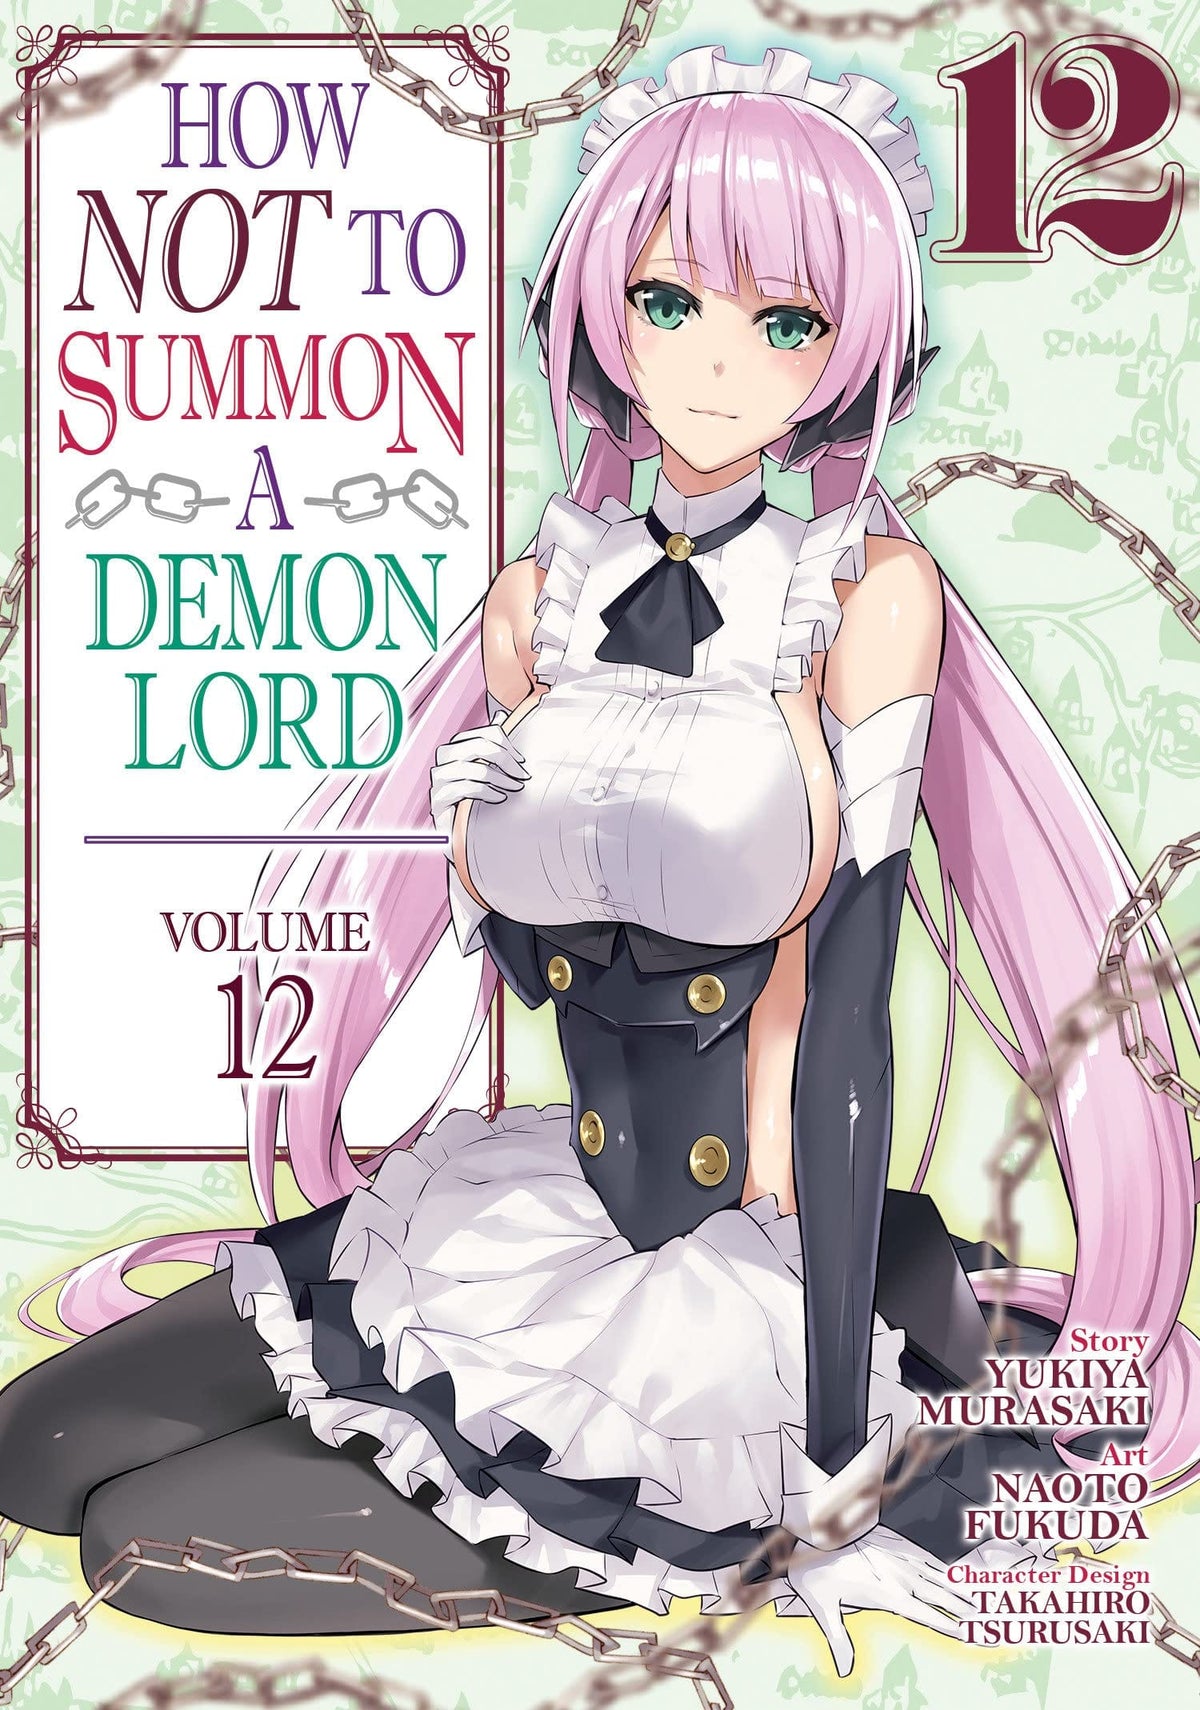 How Not to Summon a Demon Lord Vol. 12 - Third Eye